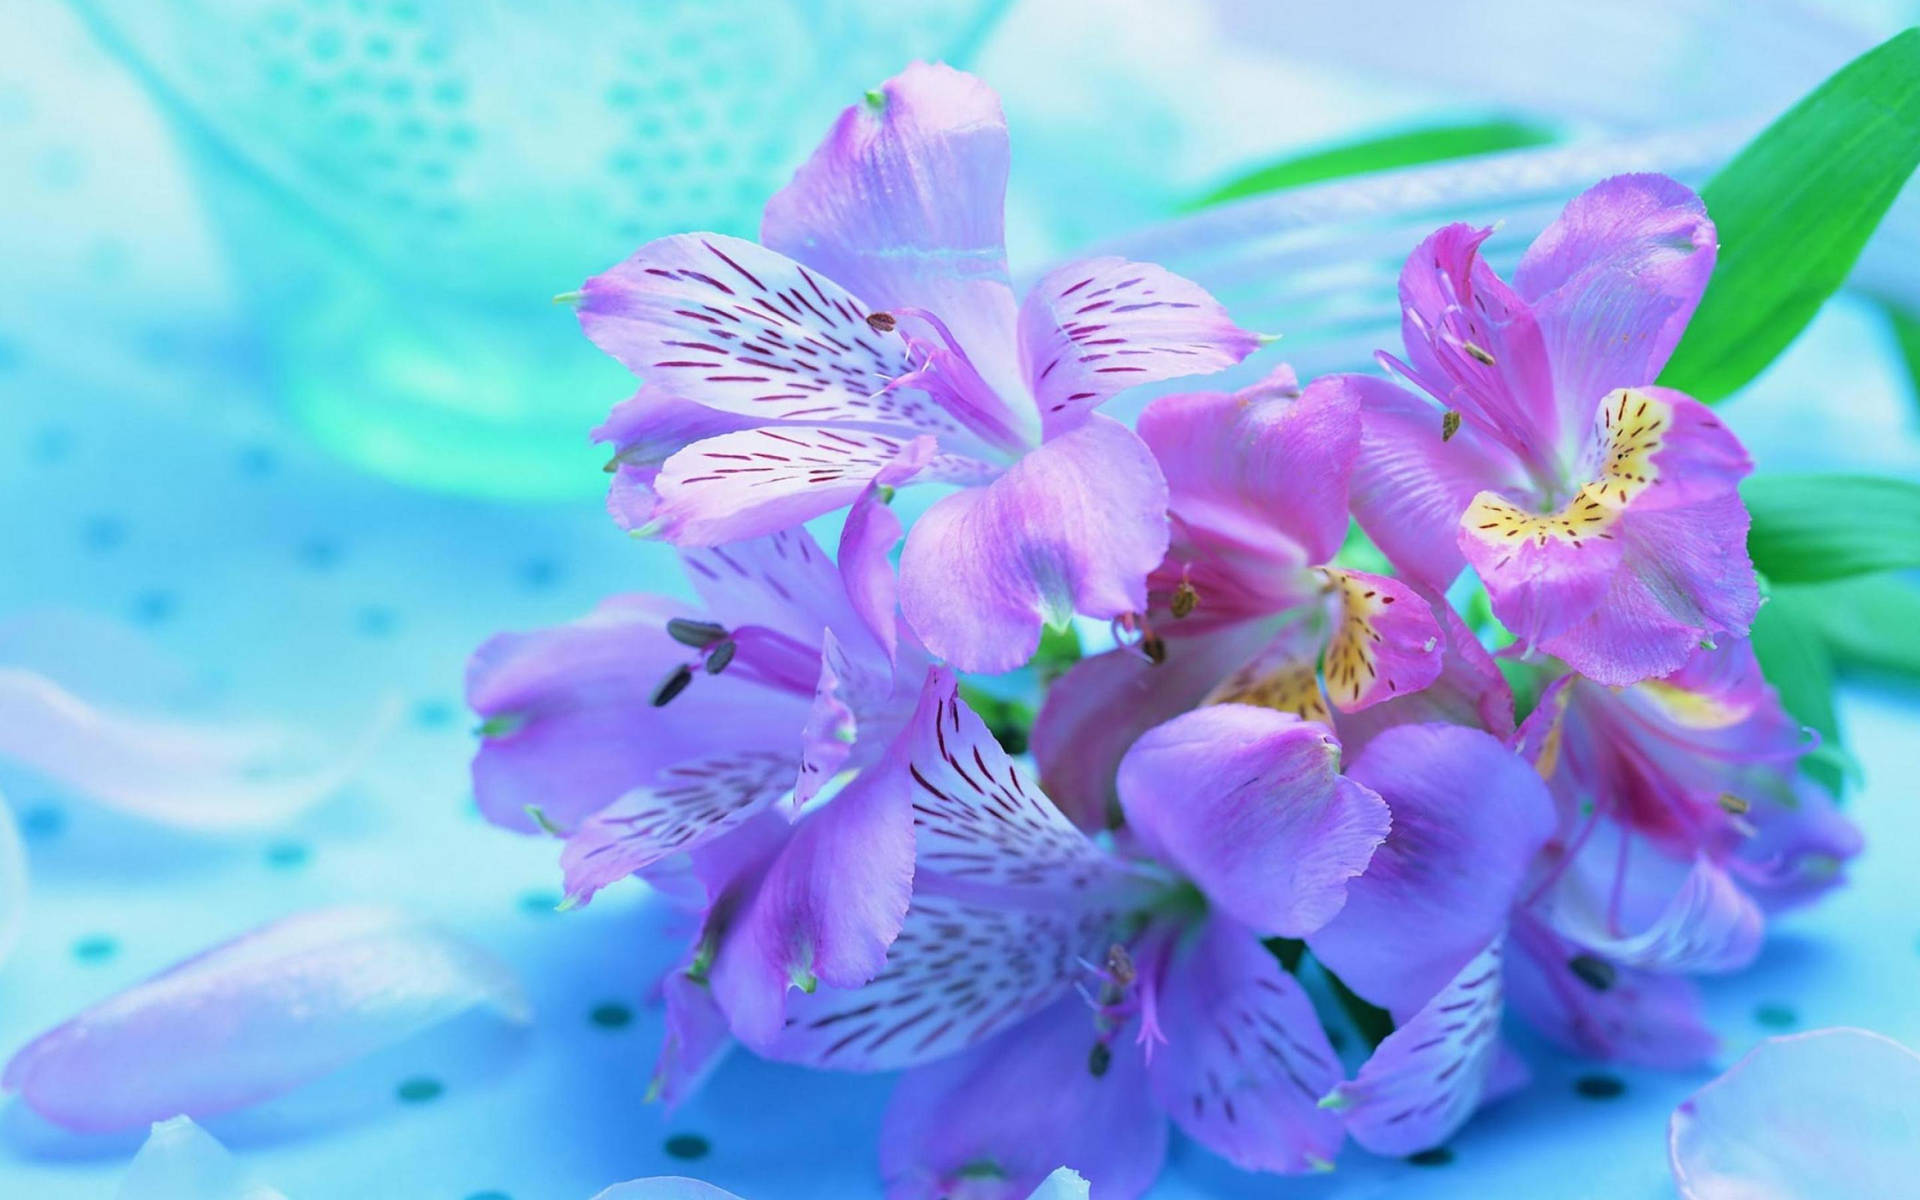 Get your work done in style with this beautiful purple flower laptop Wallpaper